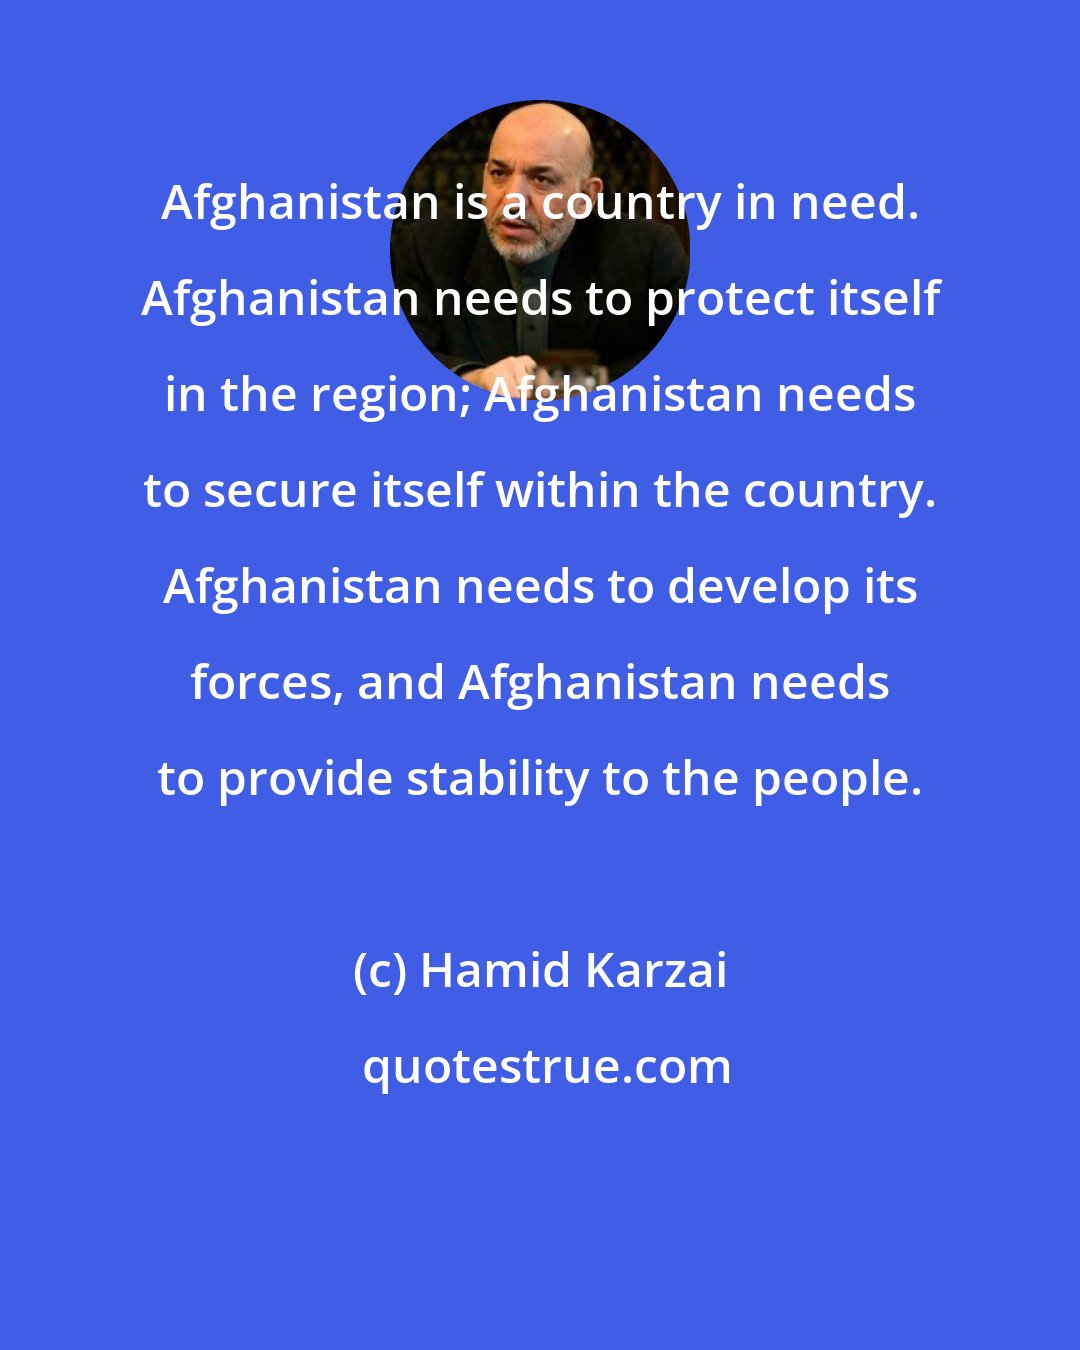 Hamid Karzai: Afghanistan is a country in need. Afghanistan needs to protect itself in the region; Afghanistan needs to secure itself within the country. Afghanistan needs to develop its forces, and Afghanistan needs to provide stability to the people.